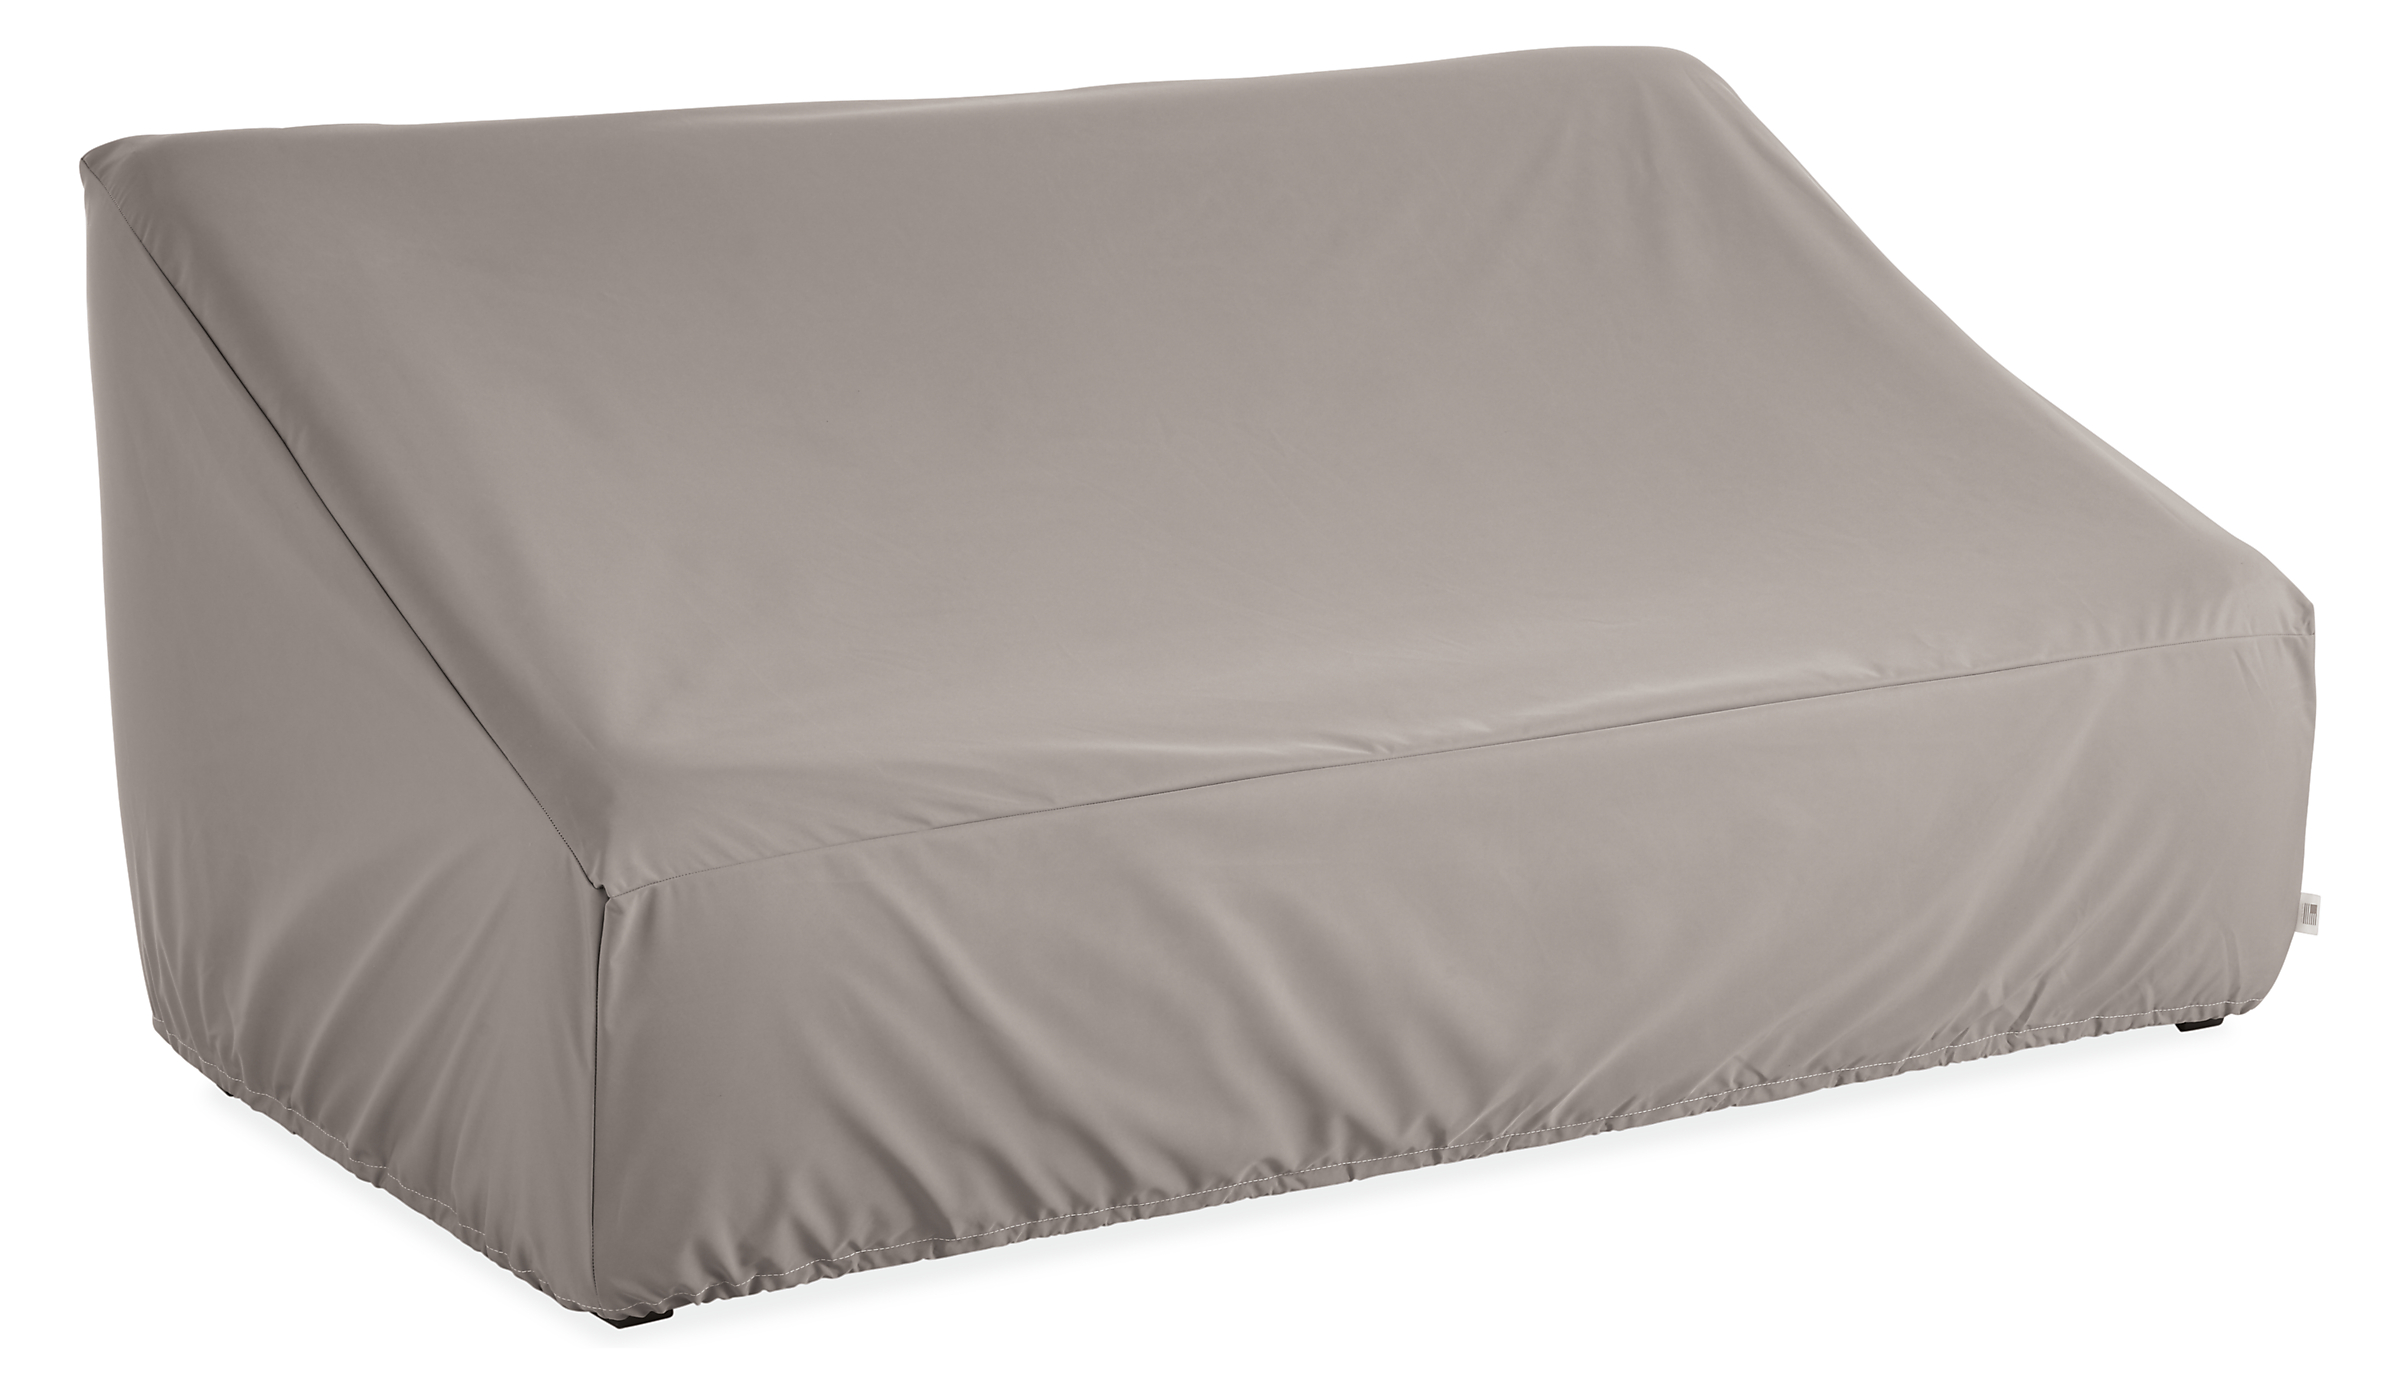 Outdoor Cover for Armless Sofa 69w 39d 29h with Drawstring